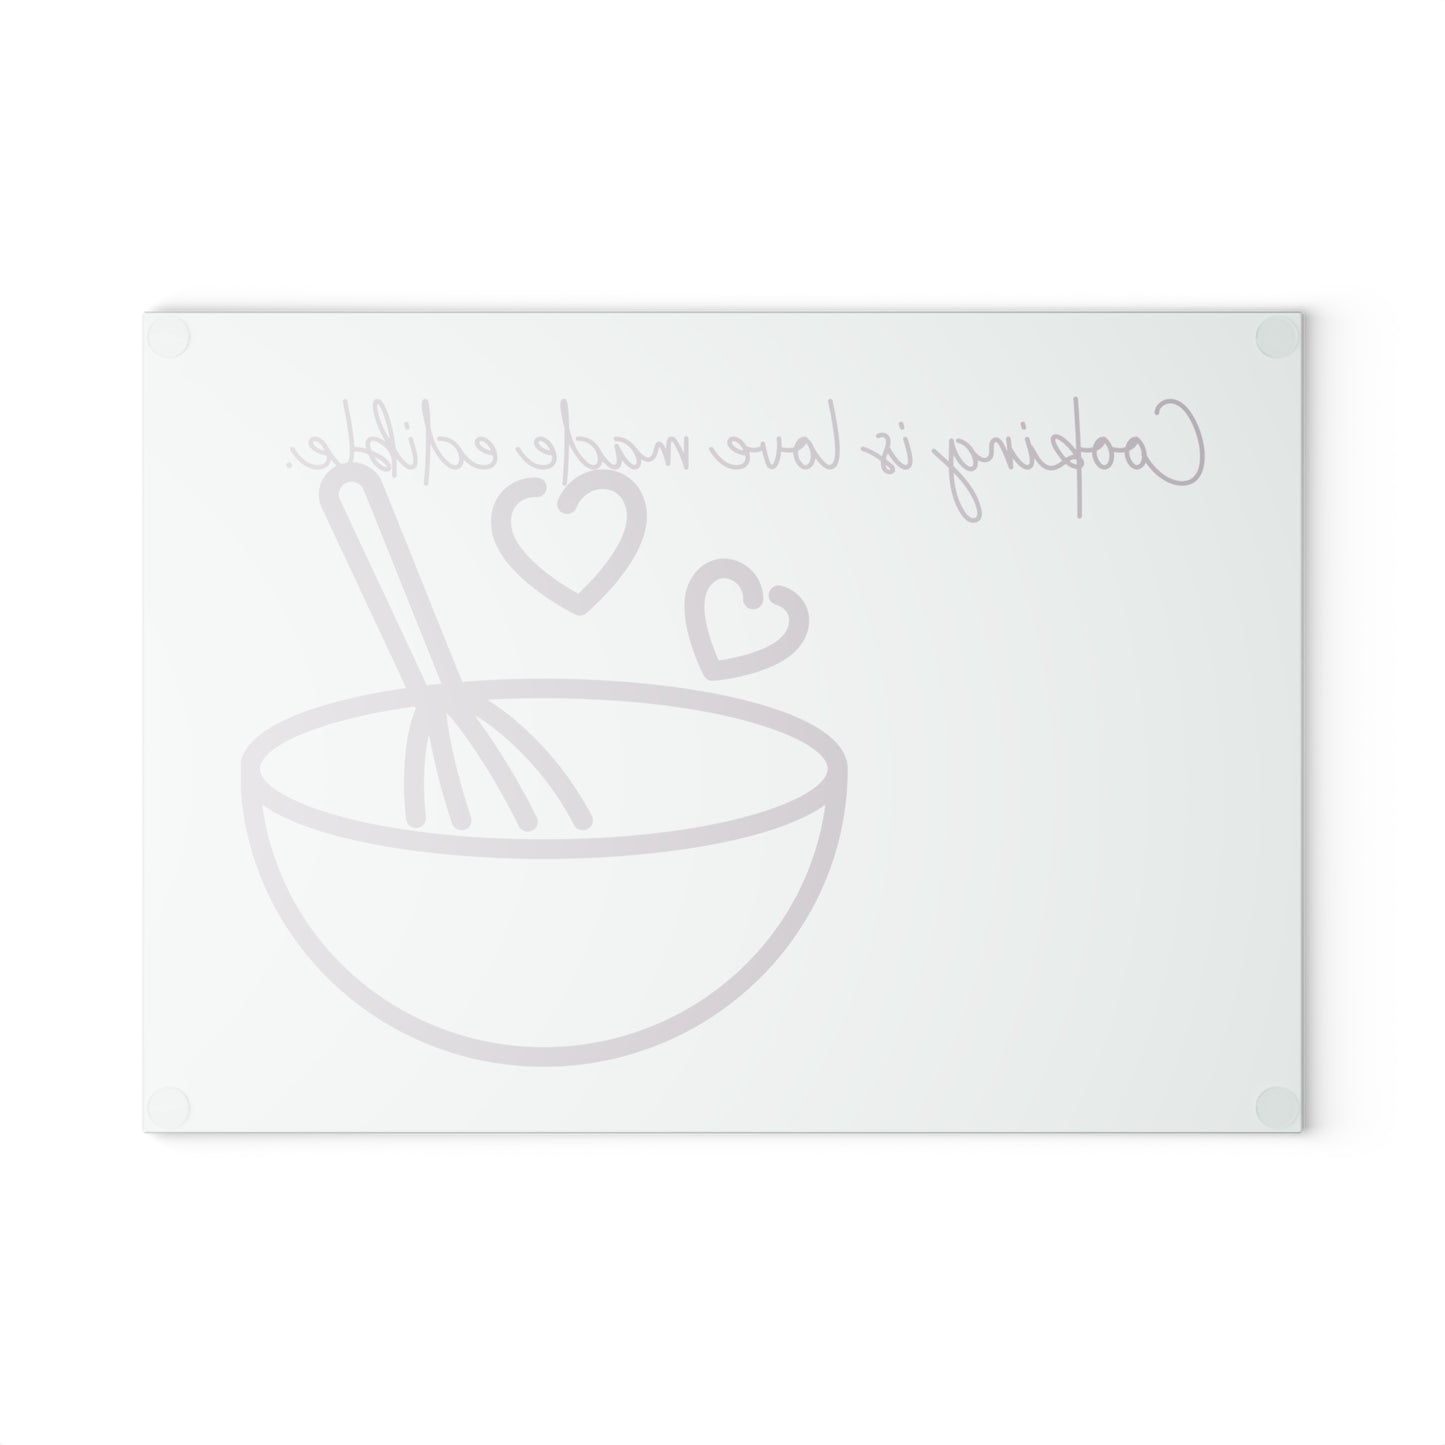 Cooking is Love Made Edible Glass Cutting Board | Housewarming Return Gift | Unique Party Favor